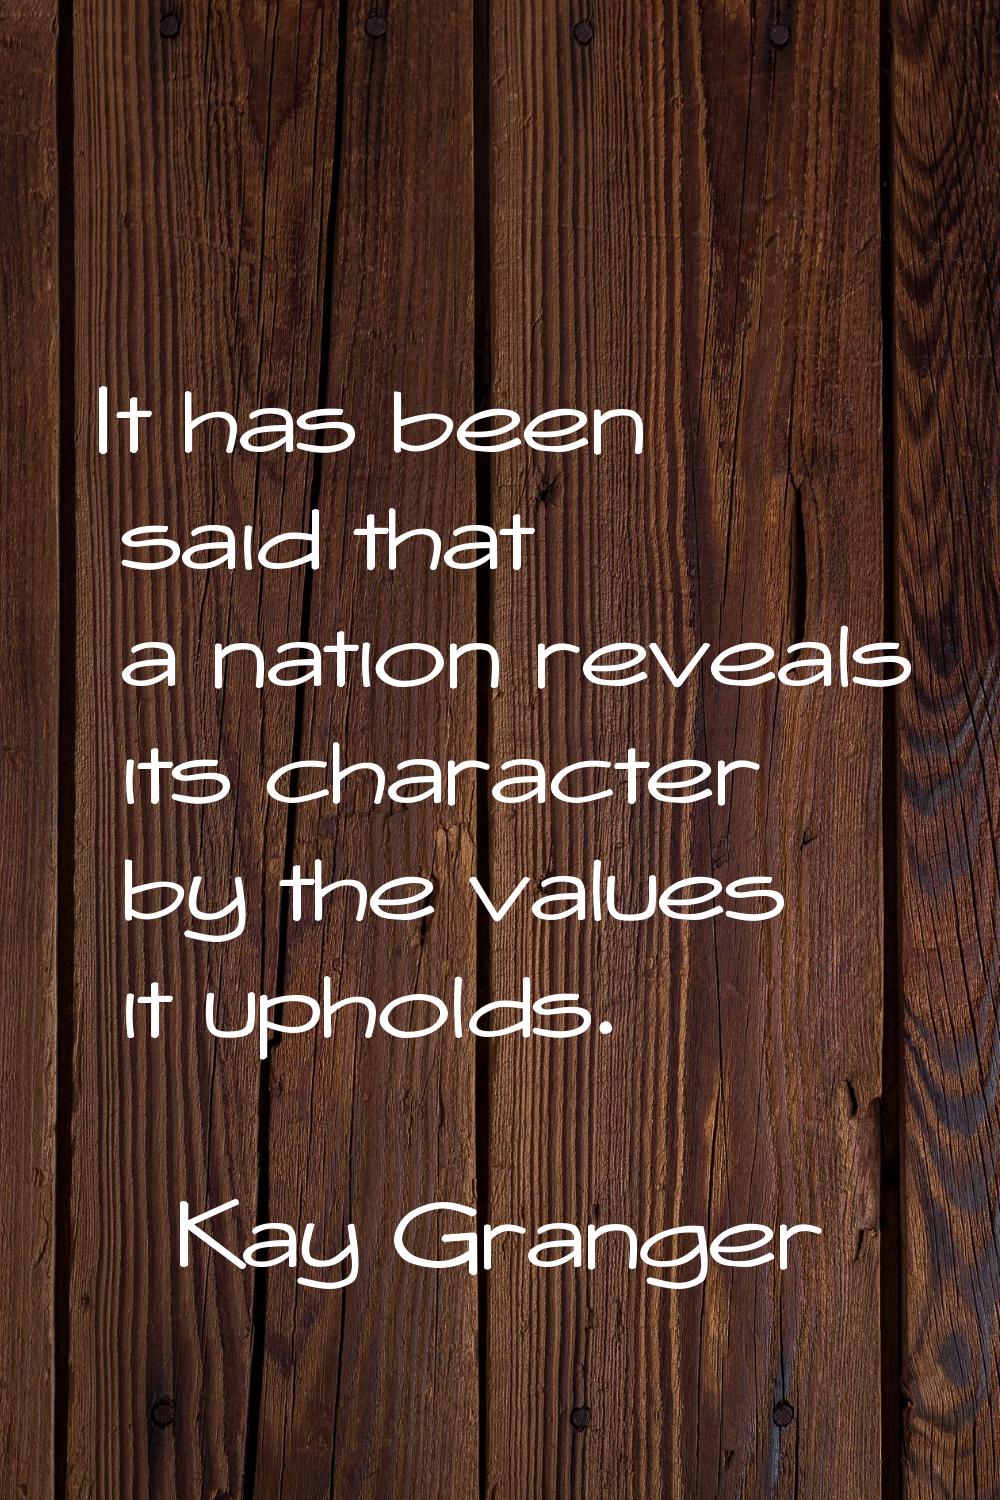 It has been said that a nation reveals its character by the values it upholds.